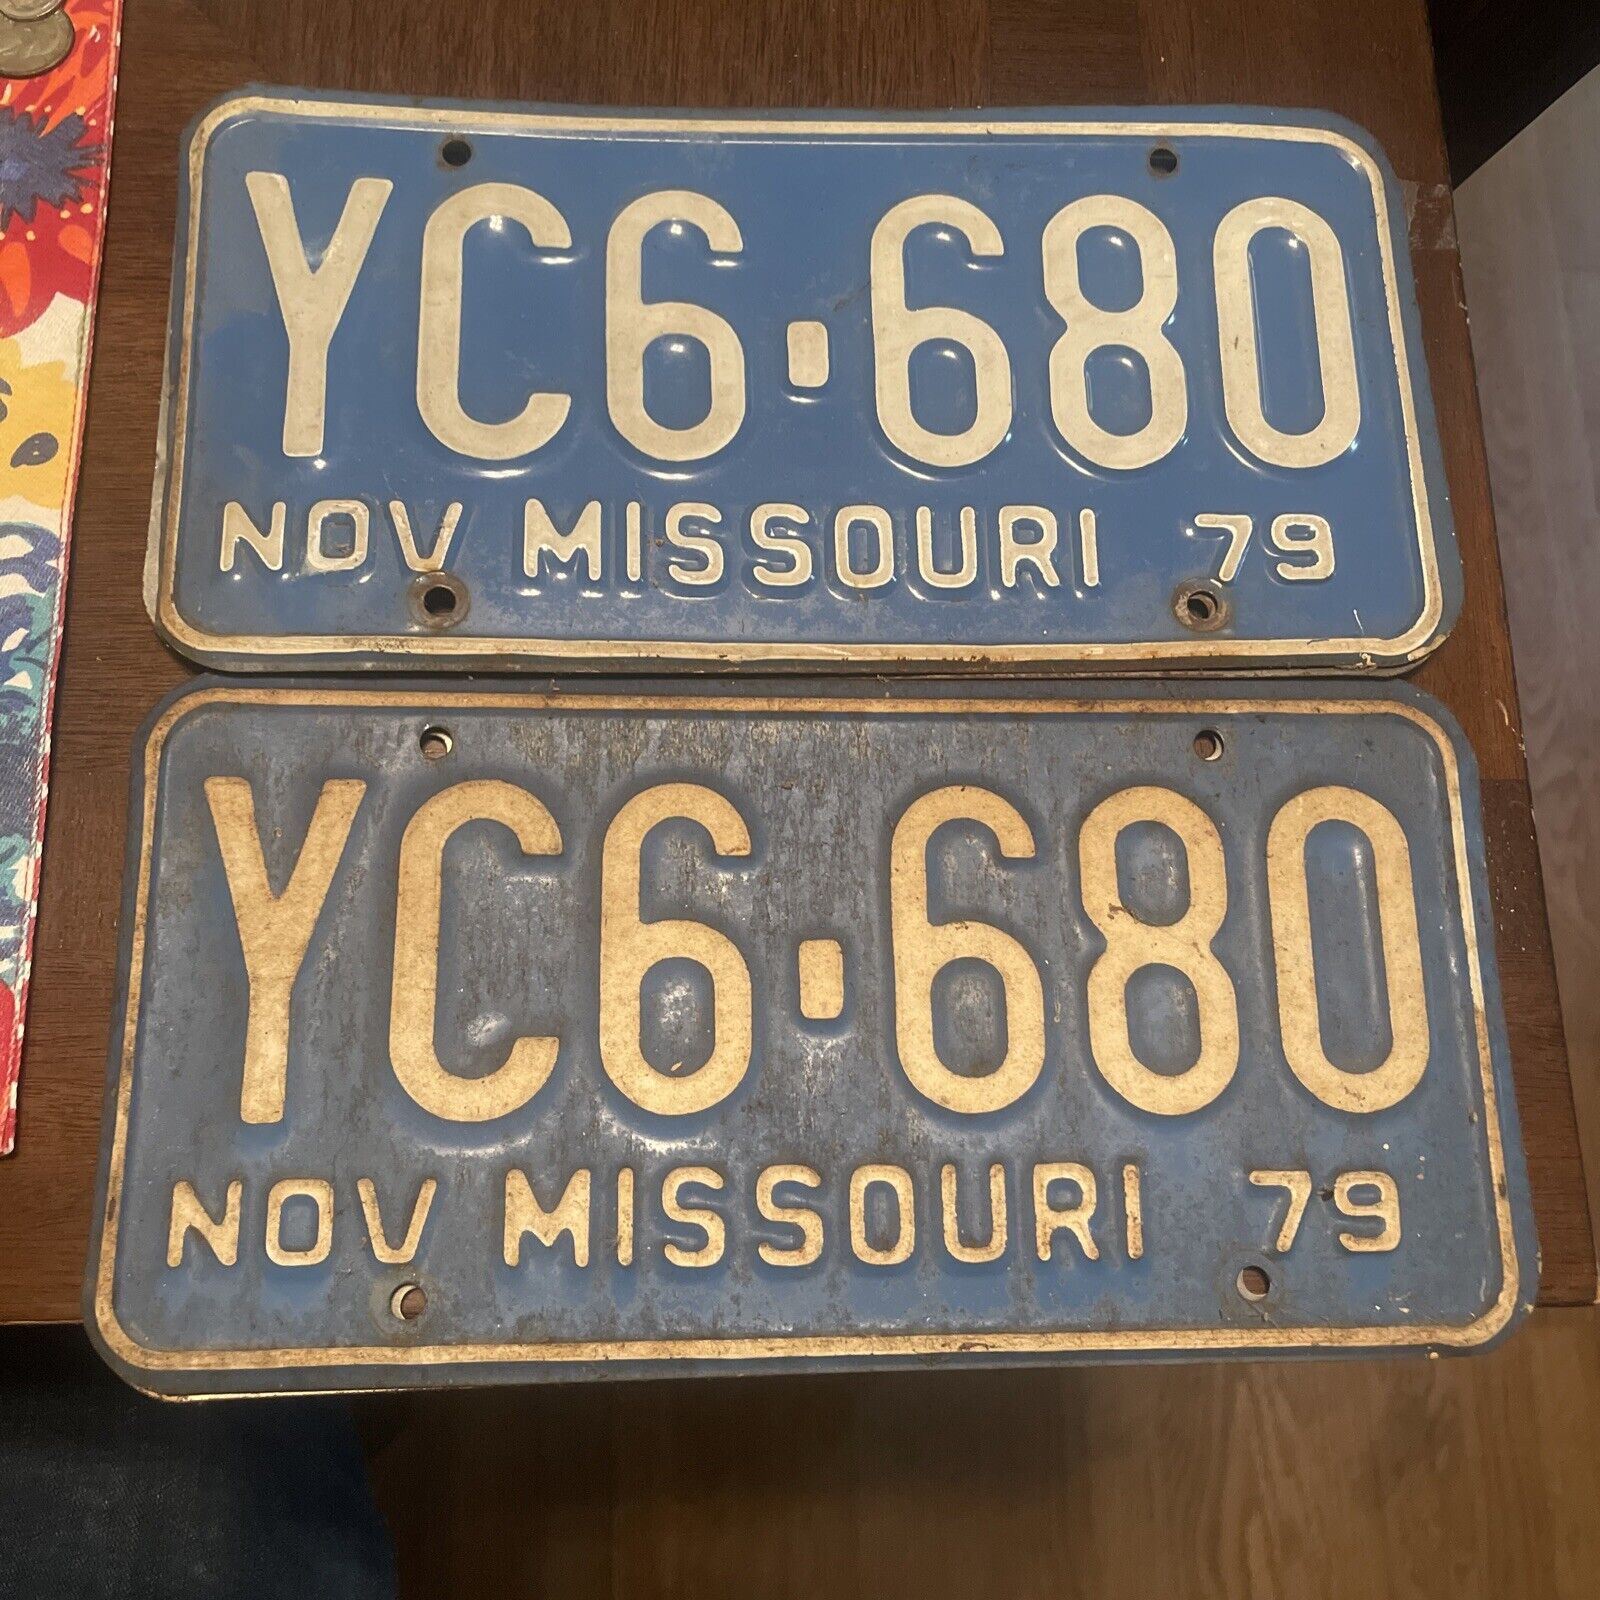 *Matched set 1979 Missouri license plates Automotive Collection Both Included